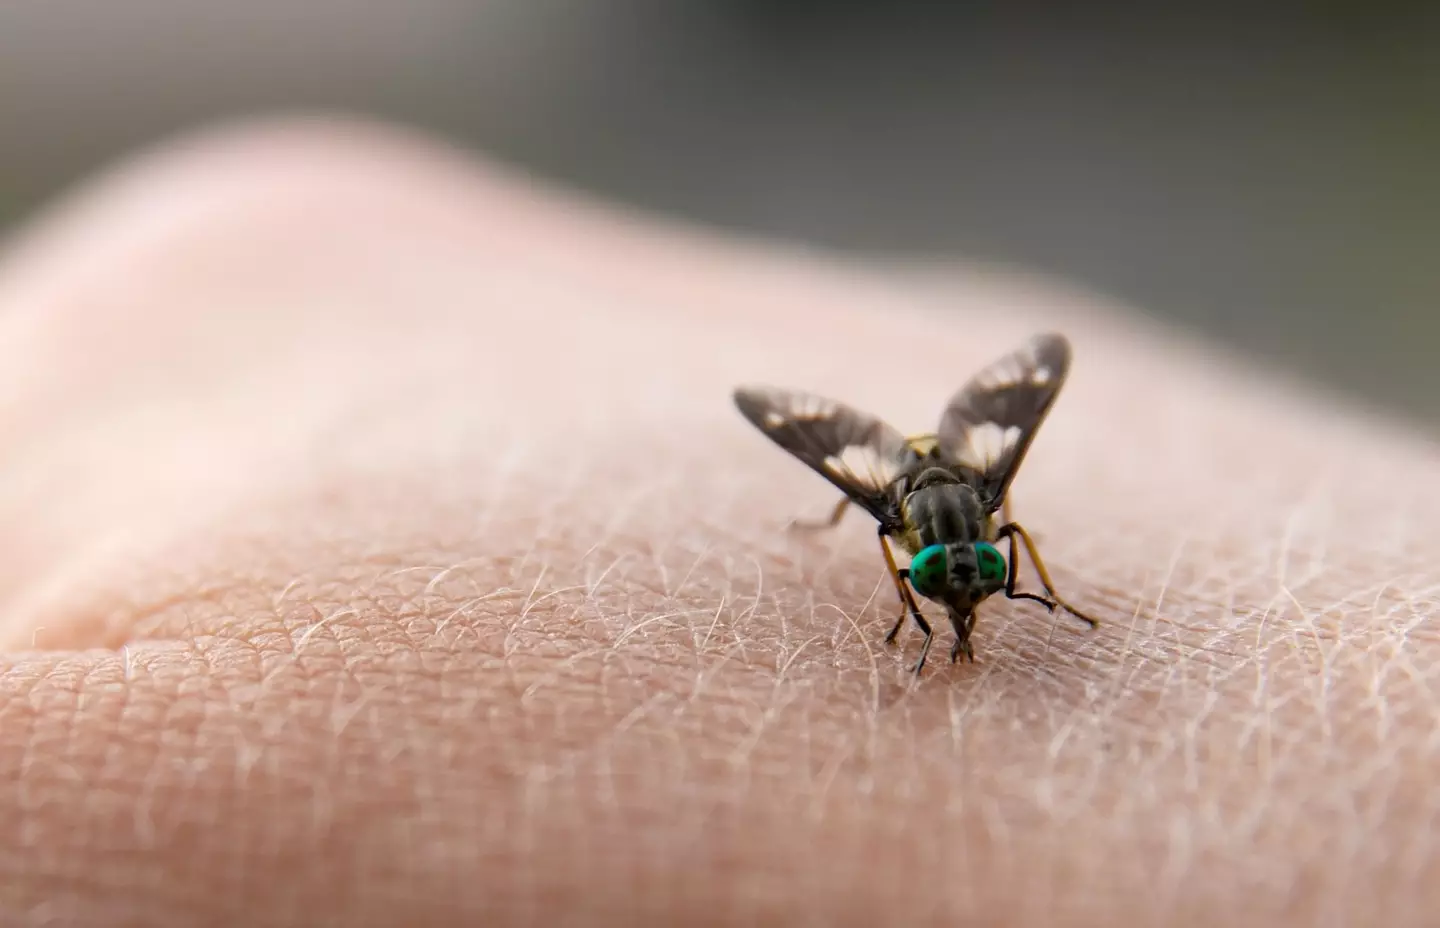 A horsefly bite can become infected, so avoid them if possible and if you do get bit disinfect the wound before using an ice pack.